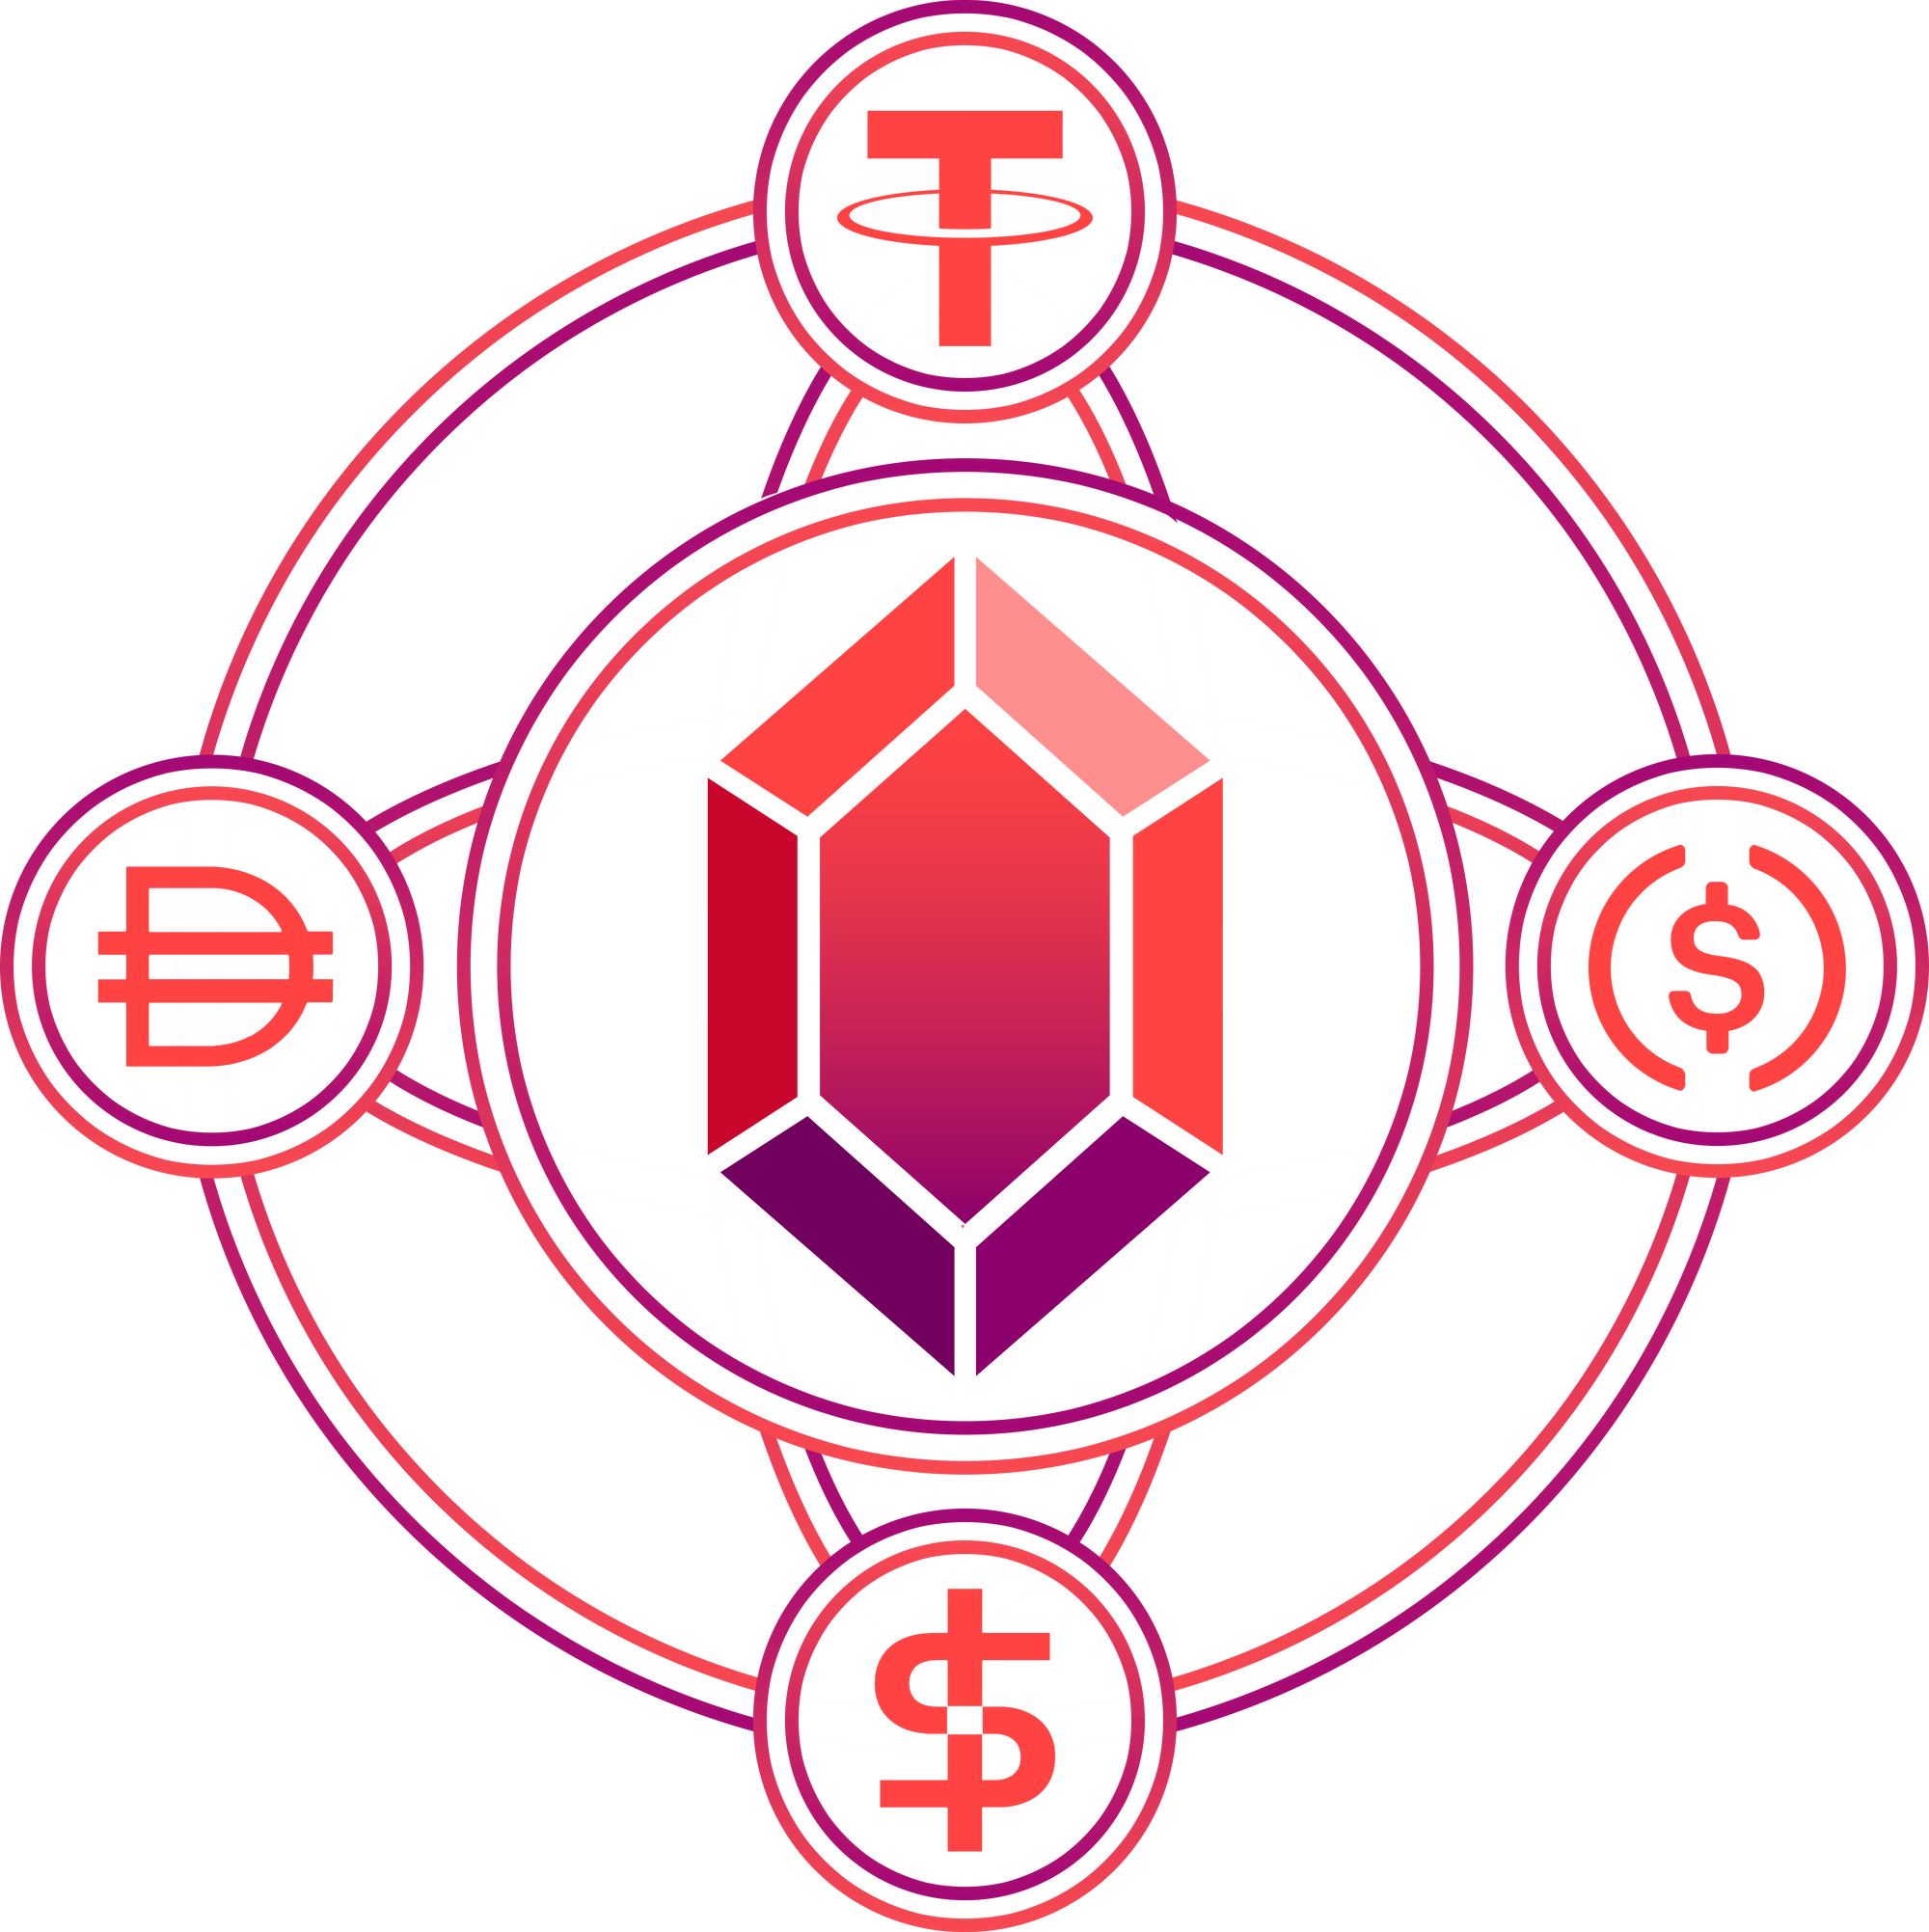 Four interconnected stablecoins with Ruby logo in the center.